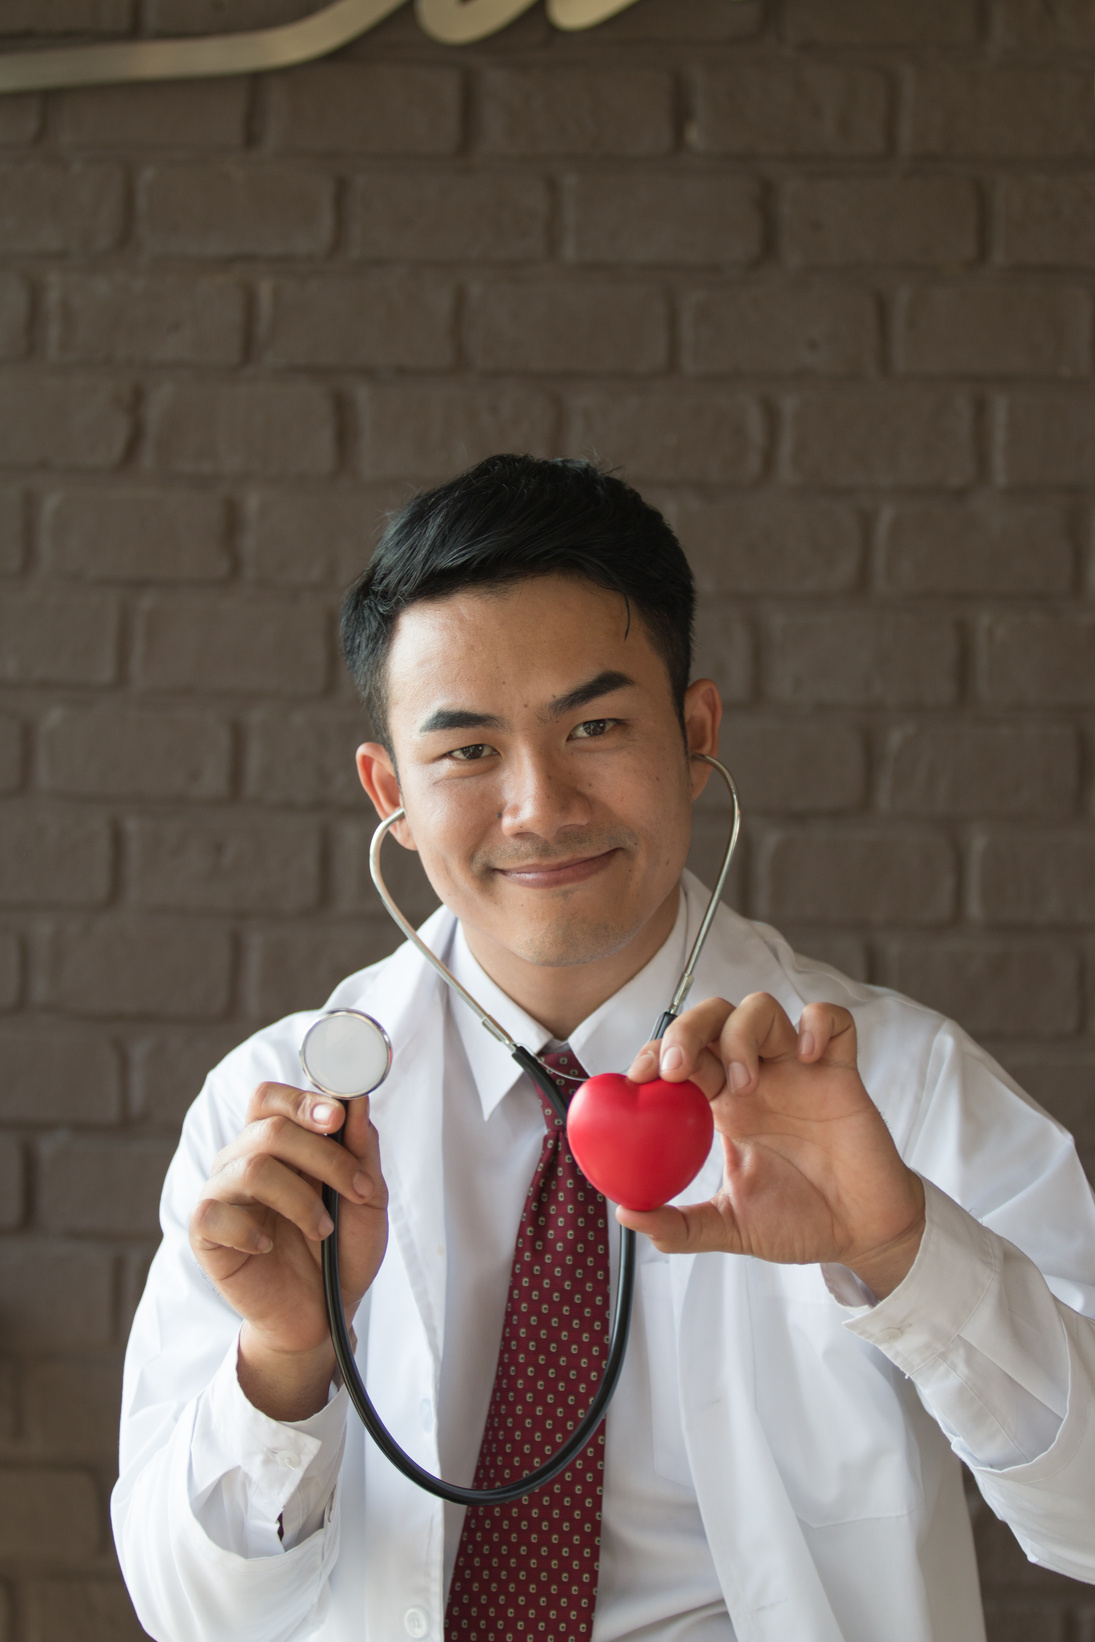 Portrait of a Doctor Holding a Heart with Stethoscope